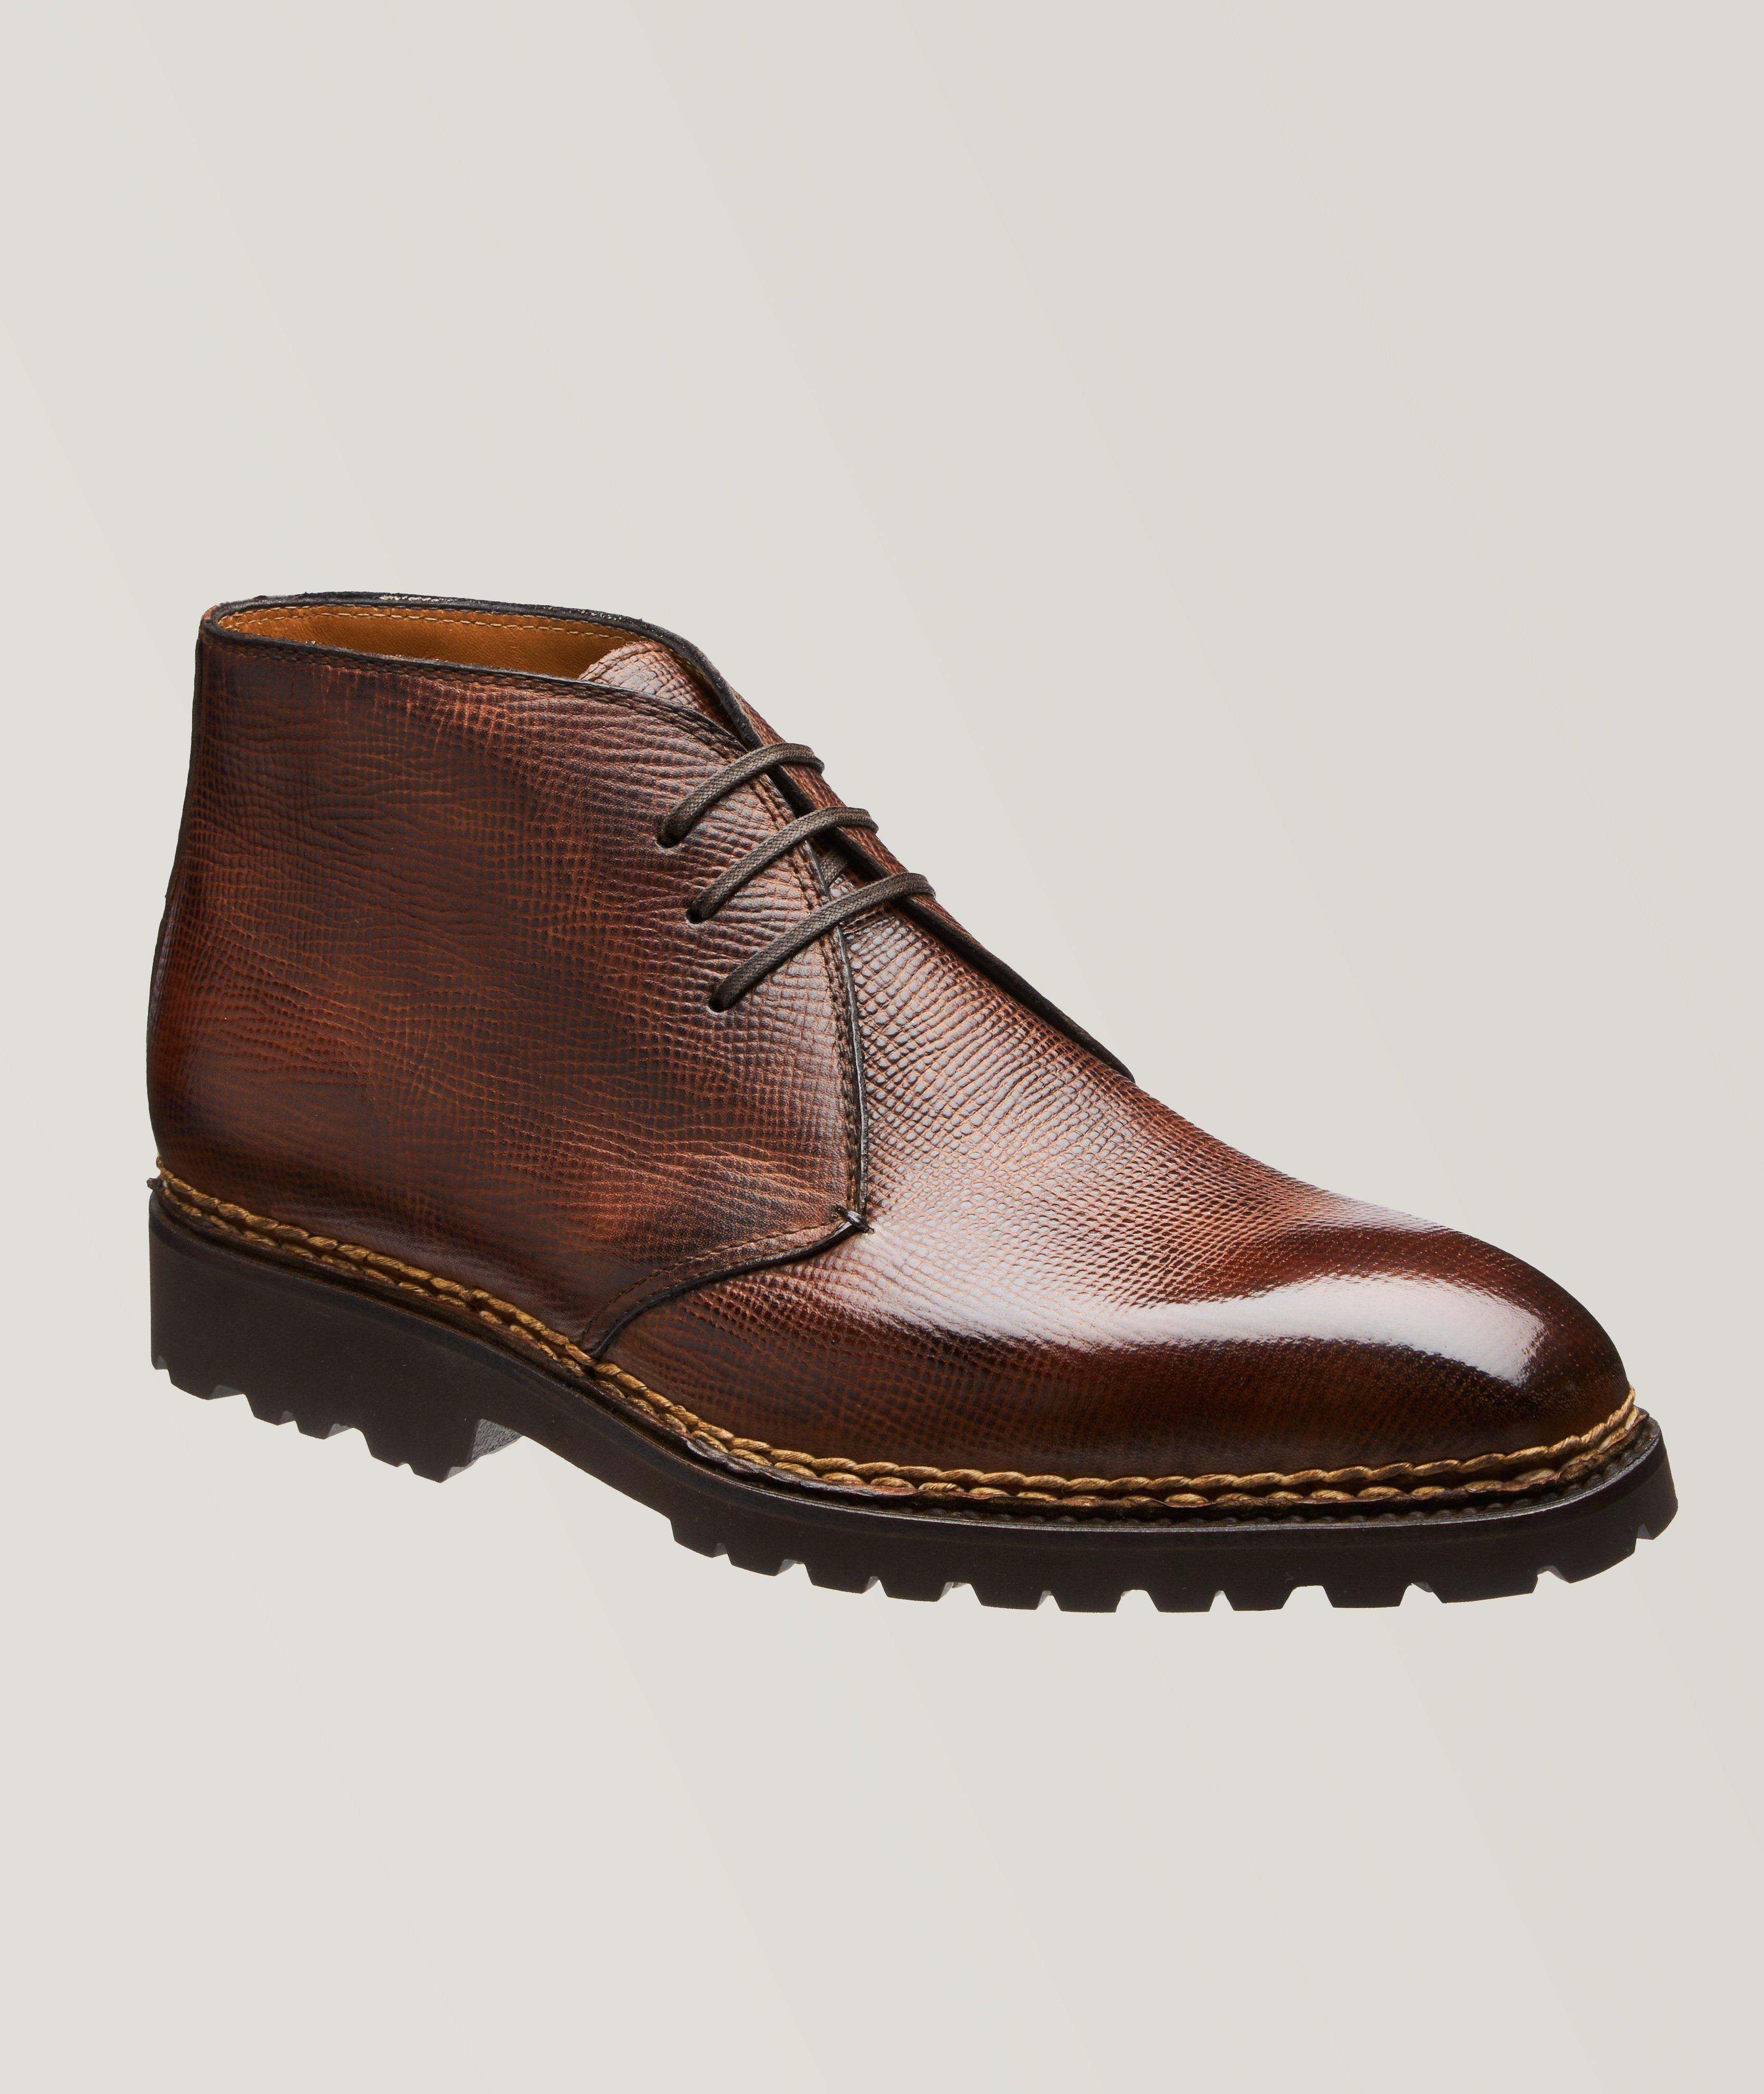 Grain Leather Lugged Desert Boot  image 0